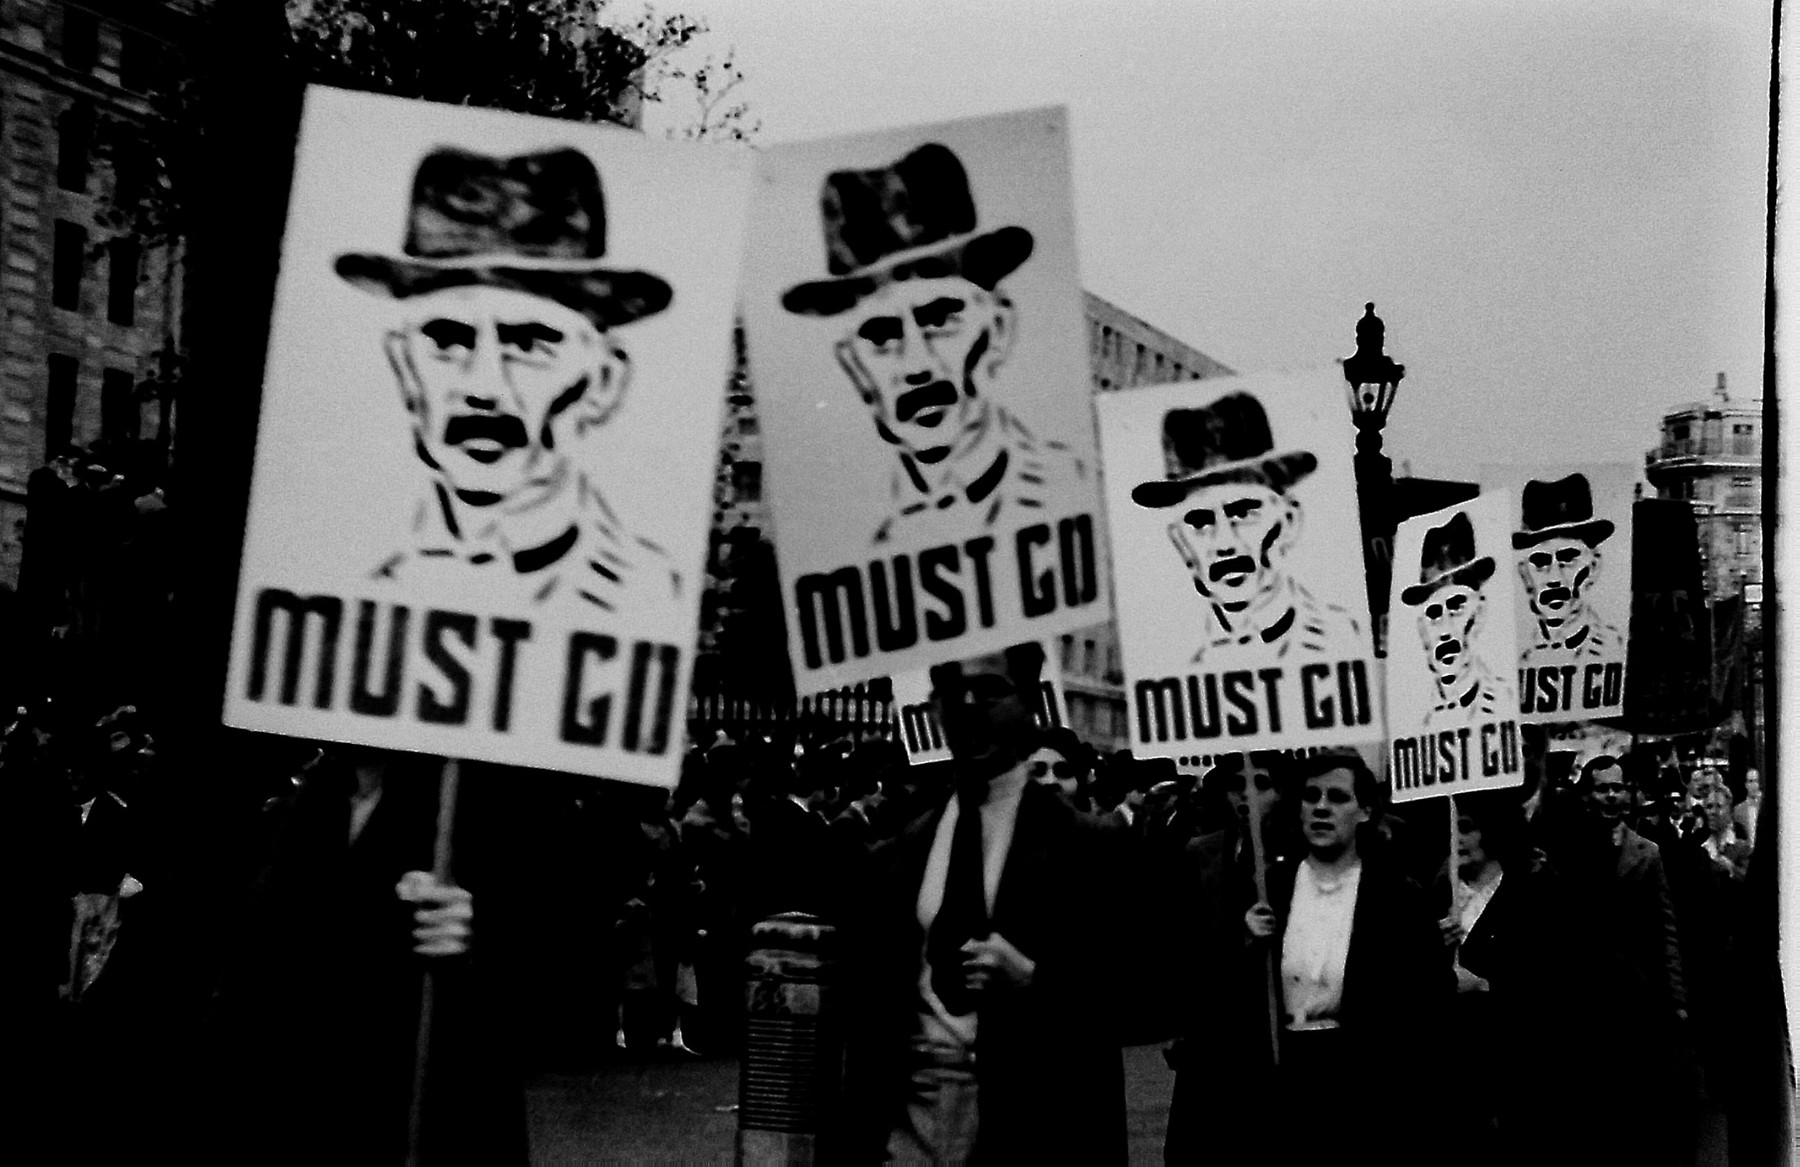 Demonstrators march through London carrying signs with a portrait of Neville Chamberlain followed by the words "Must Go" [probably right after his signing of the Munich agreement].